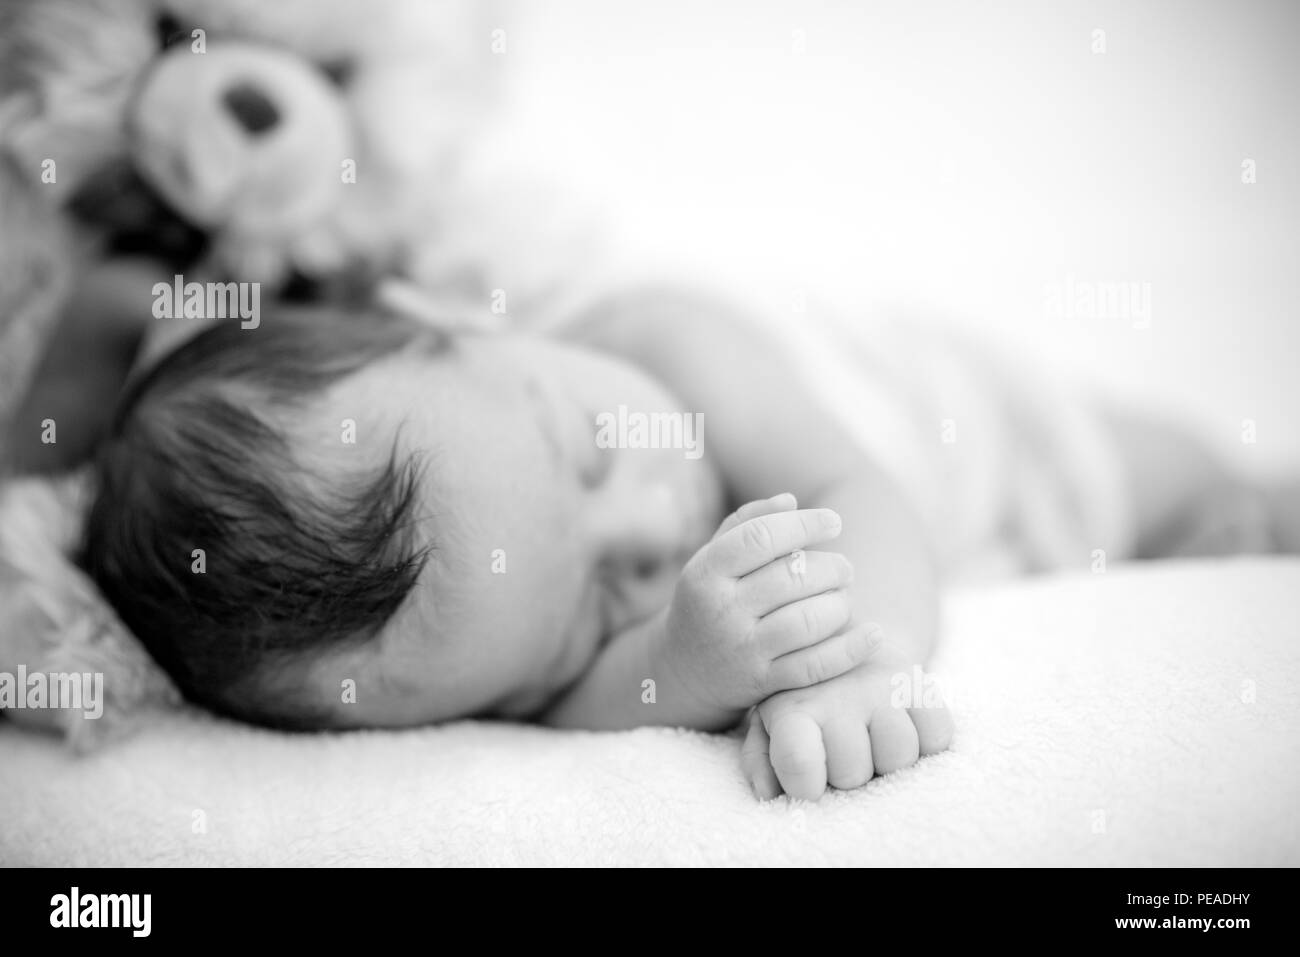 Cute newborn baby sleeps on a blanket with a toy teddy bear - happy family moments Stock Photo